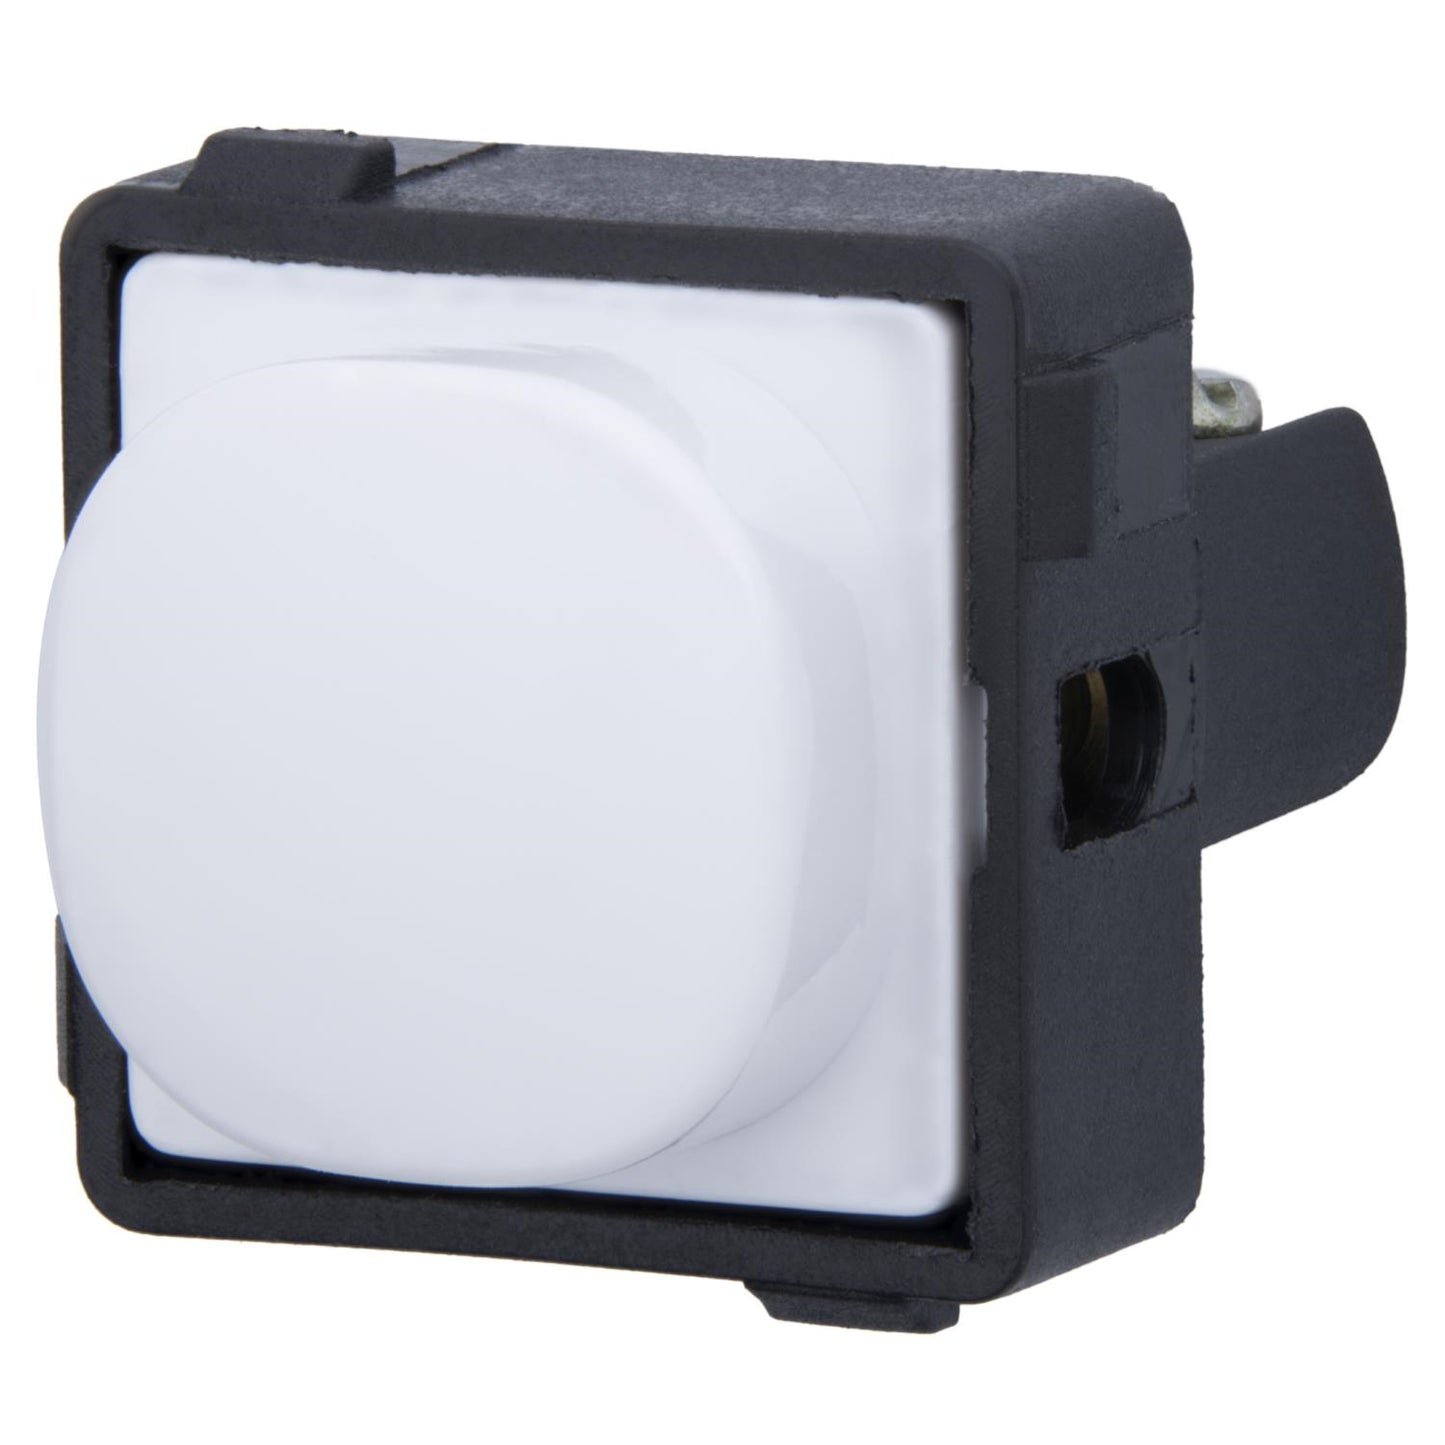 Momentary Push Button Mechanism For use with Smart Dimmers 